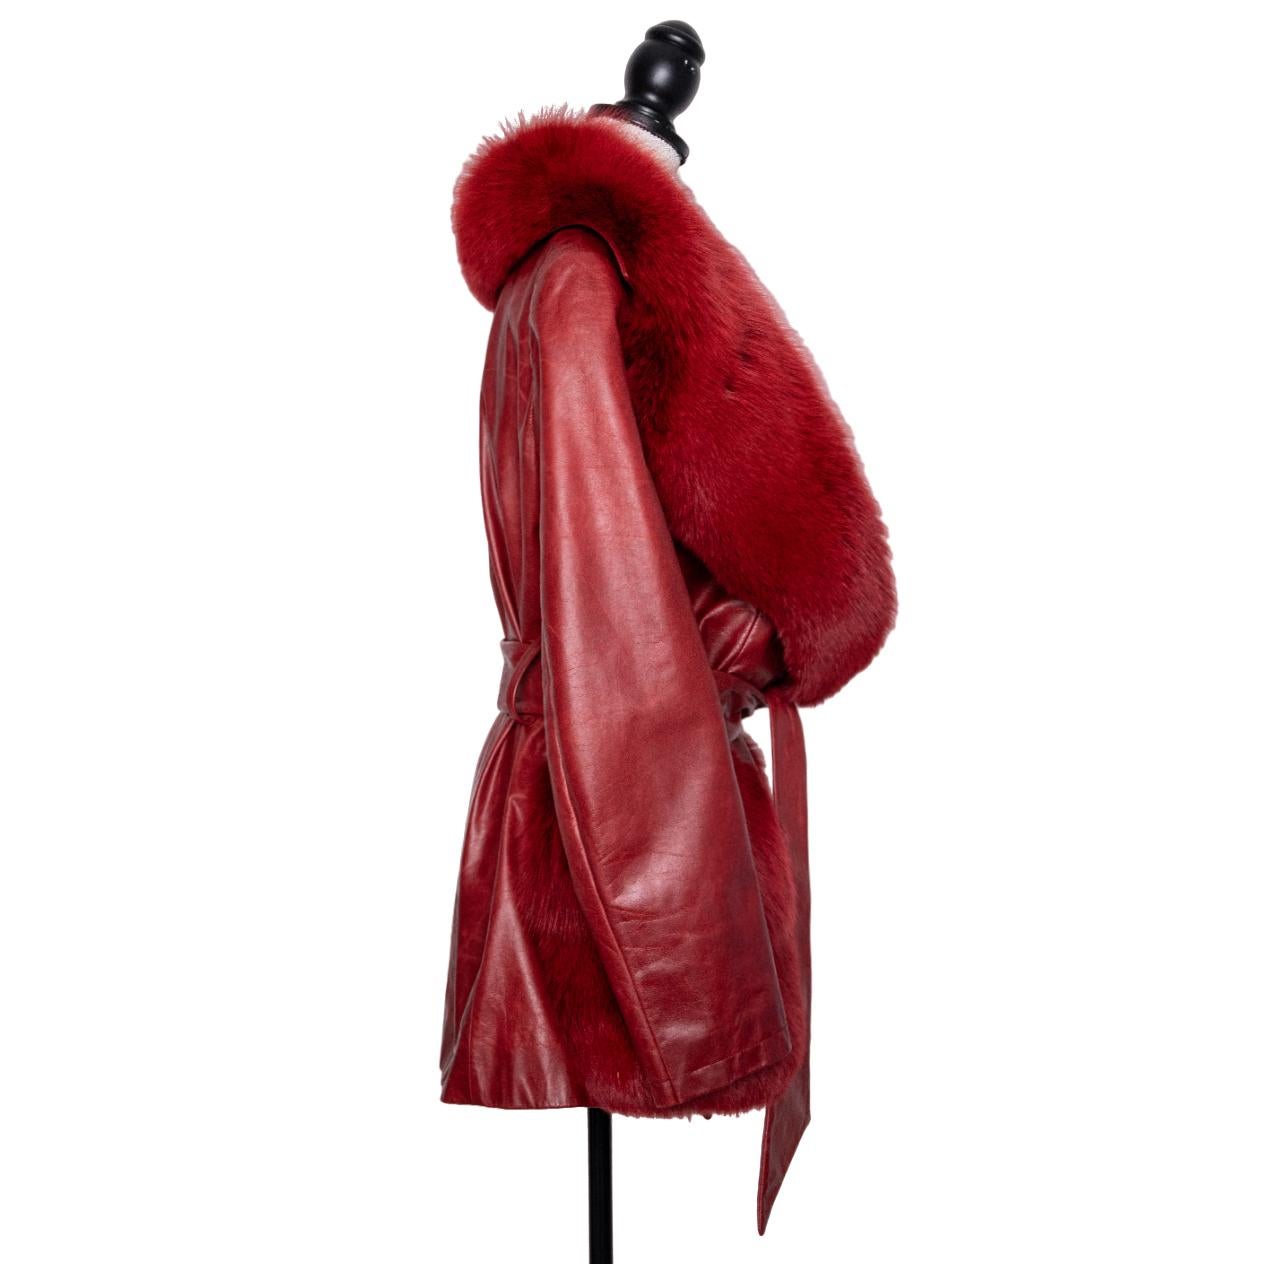 This John Galliano vintage leather jacket is a statement piece, showcasing a vibrant red color, complemented by a luxurious fox fur collar. Crafted in size F42, it represents Galliano's bold and innovative design ethos. Known for his avant-garde